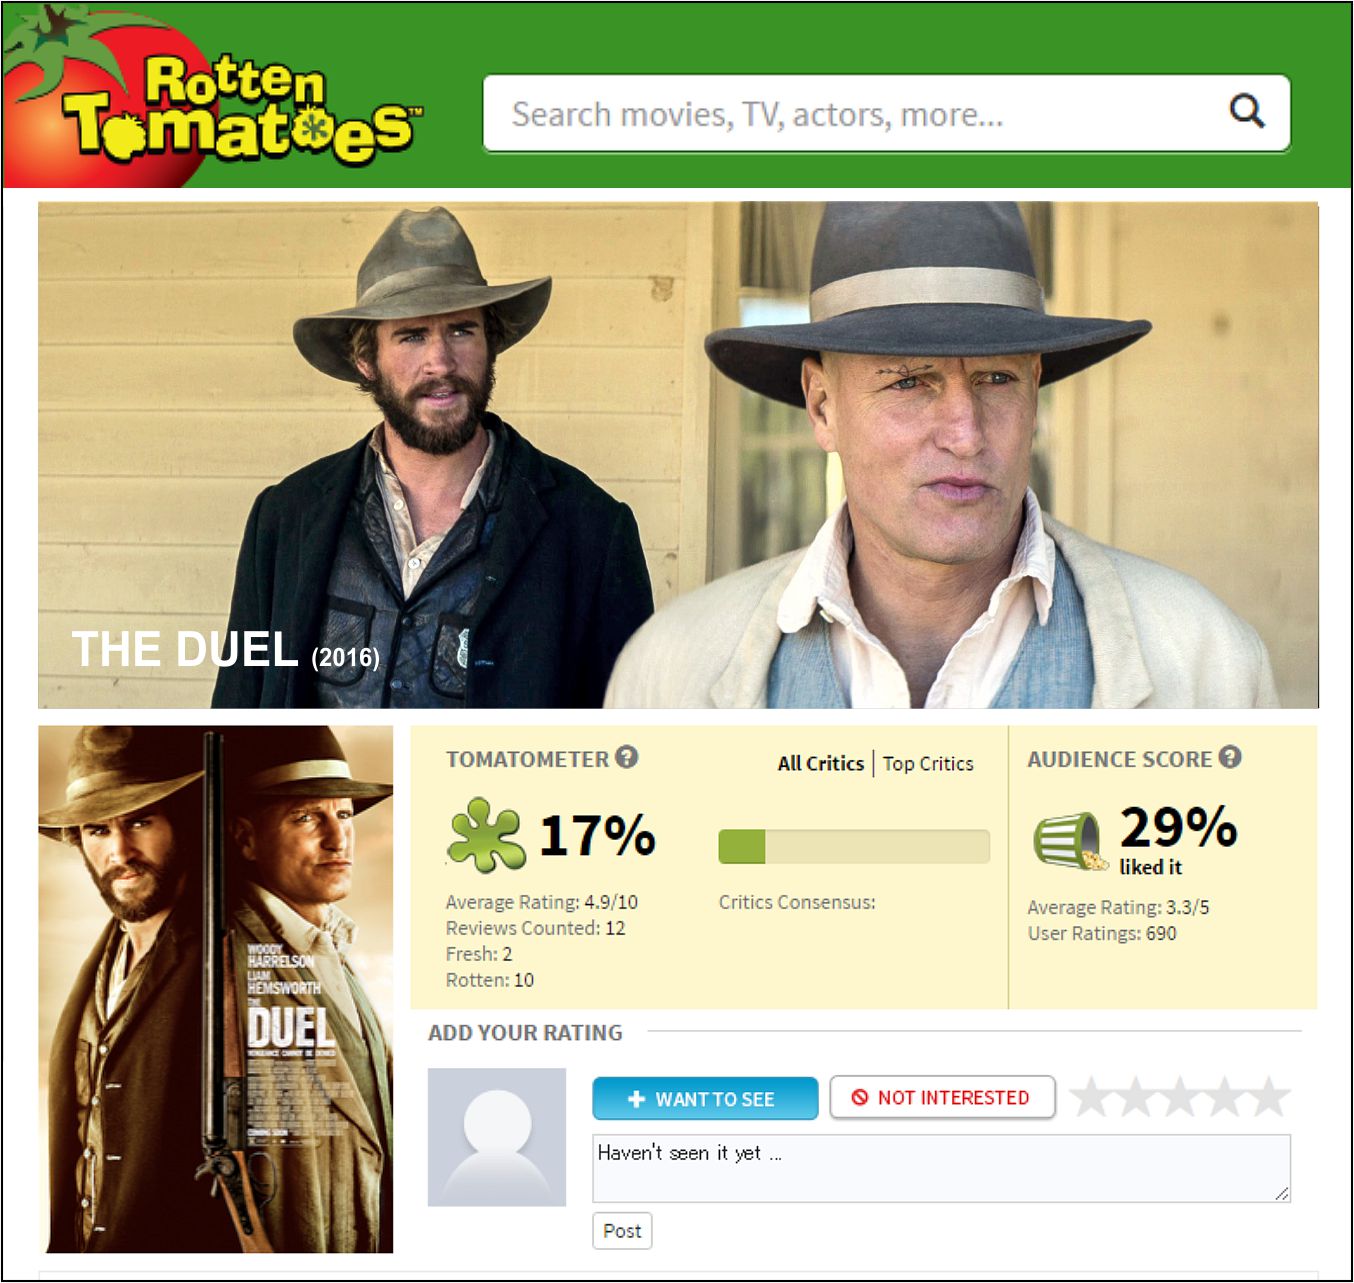 The DUEL 2016 Rotten Tomatoes review